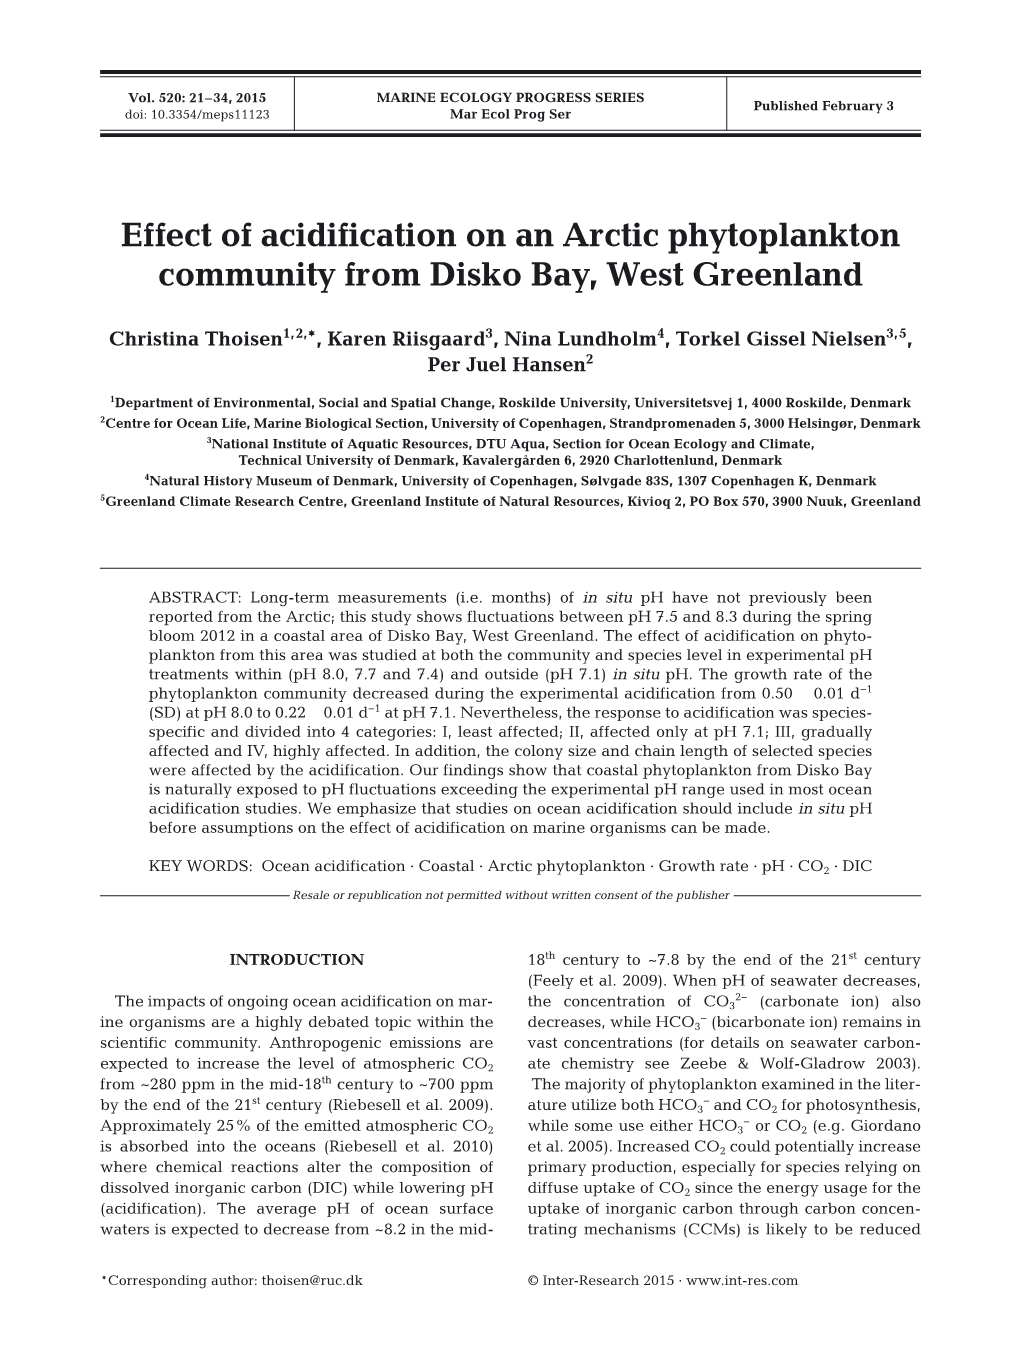 Effect of Acidification on an Arctic Phytoplankton Community from Disko Bay, West Greenland